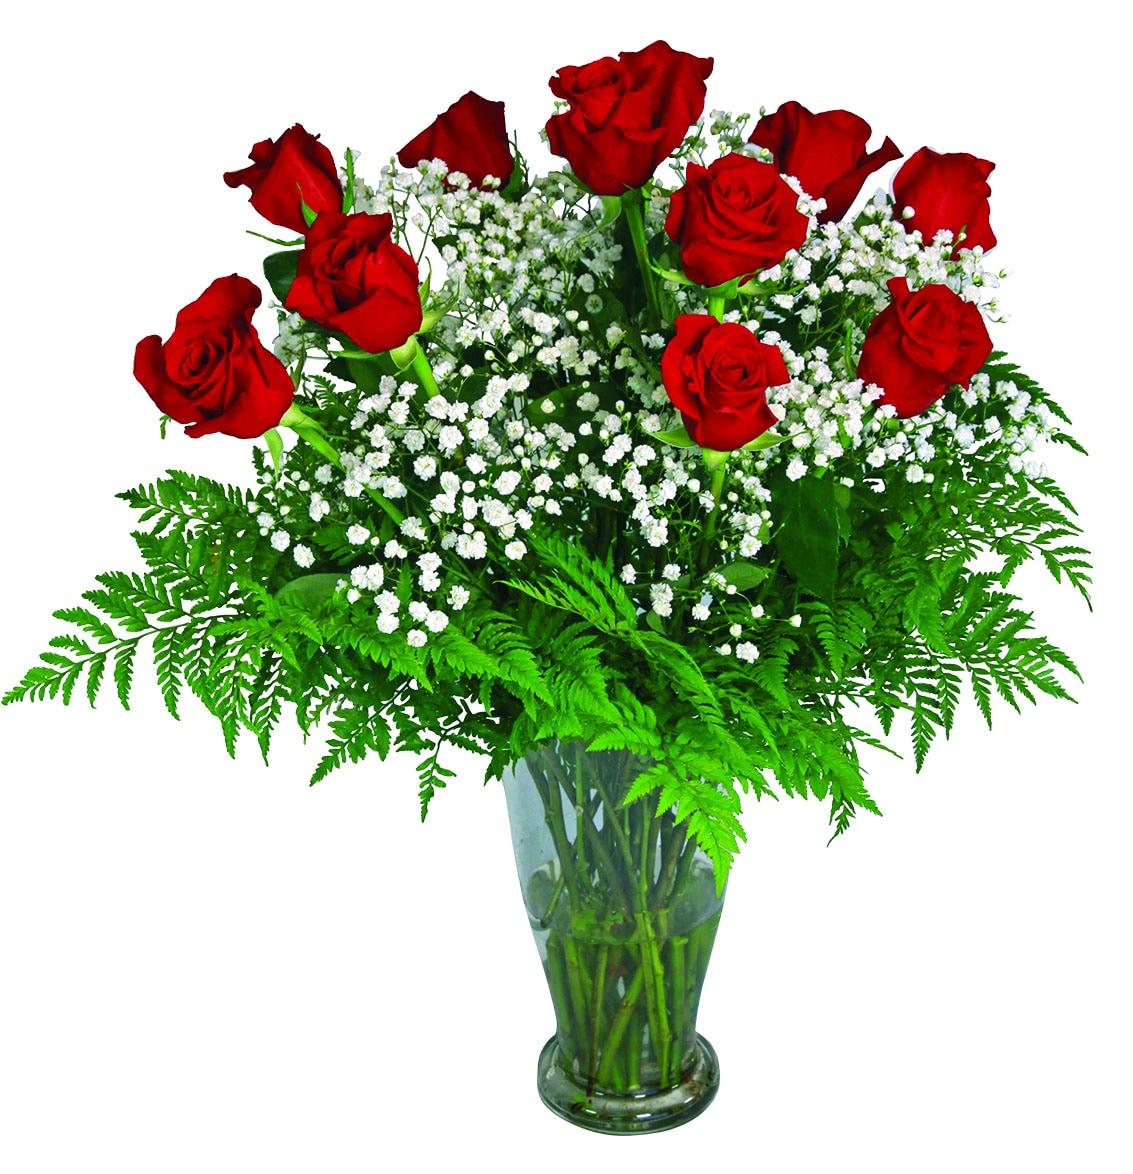 A dozen long stemmed red roses with greens and baby's breath in a vase.